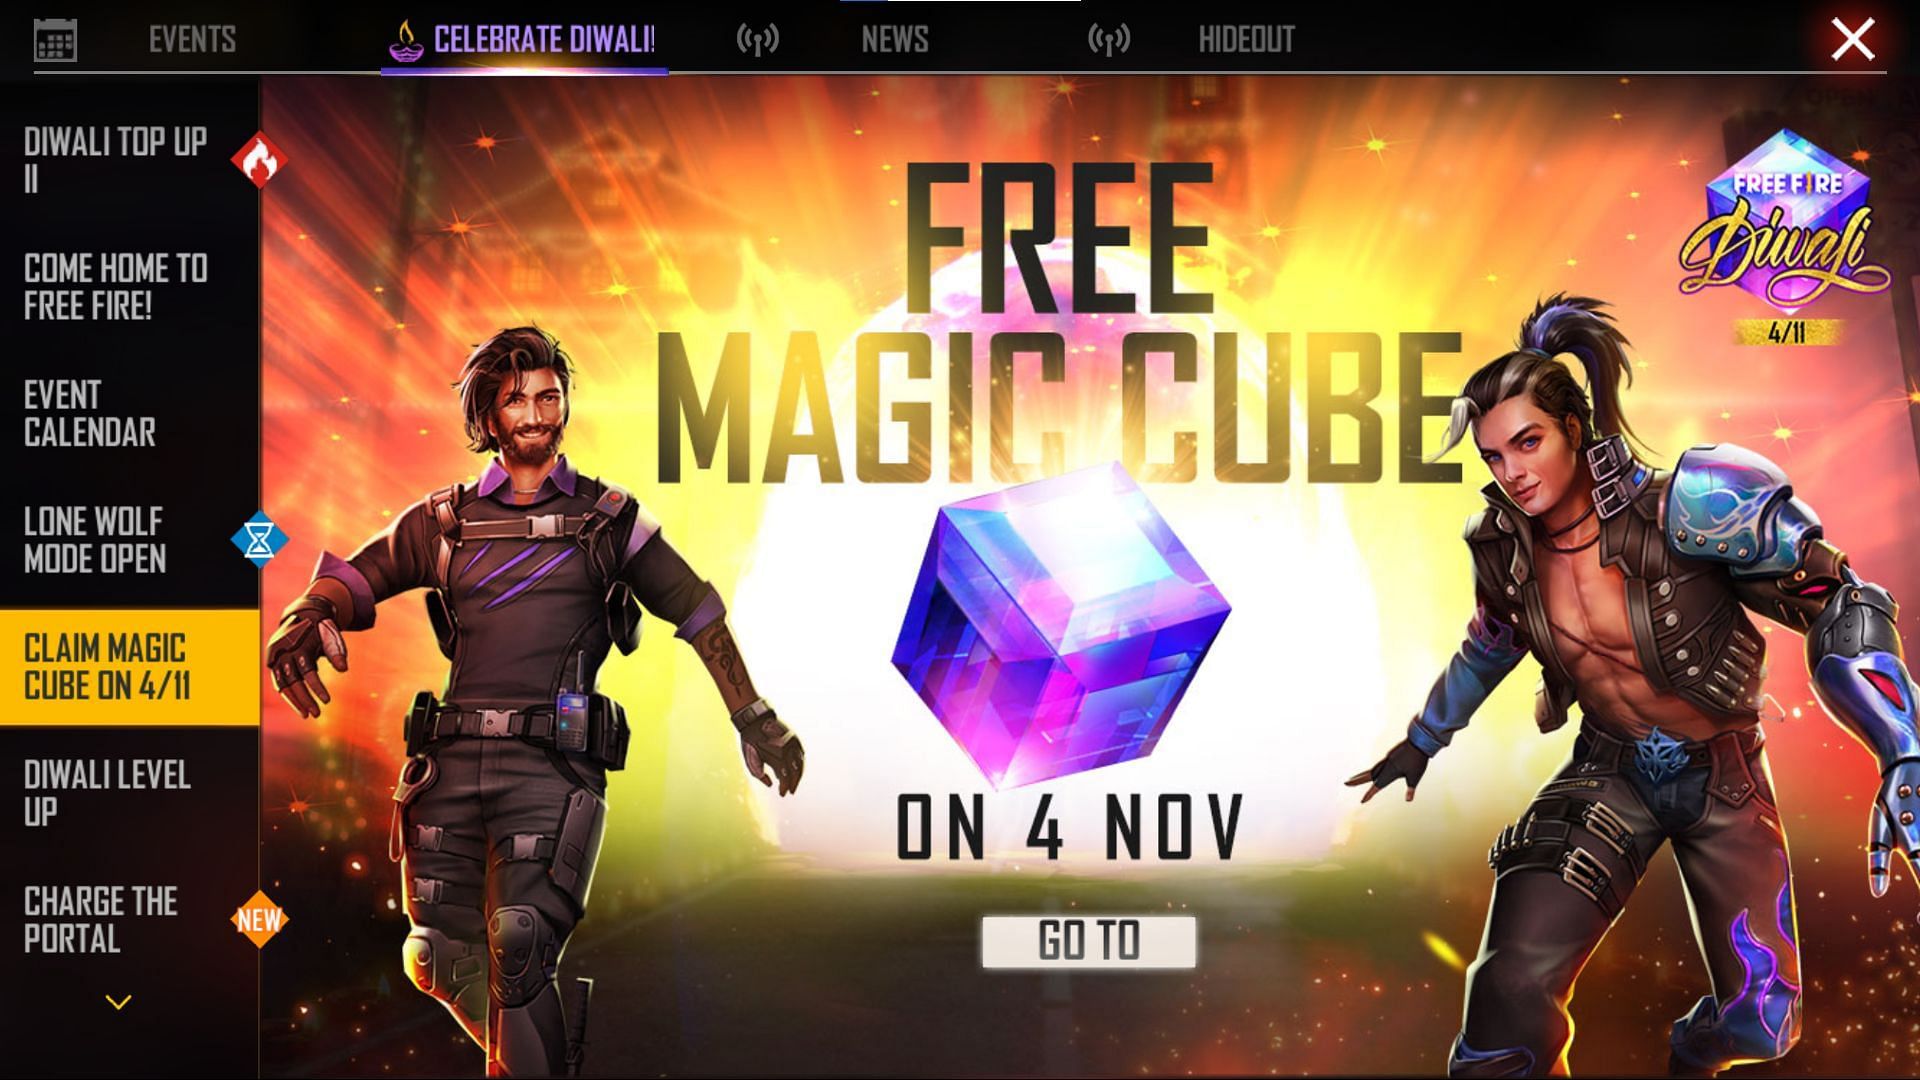 Using this Cube, players will be eligible to claim a variety of bundles (Image via Free FIre)